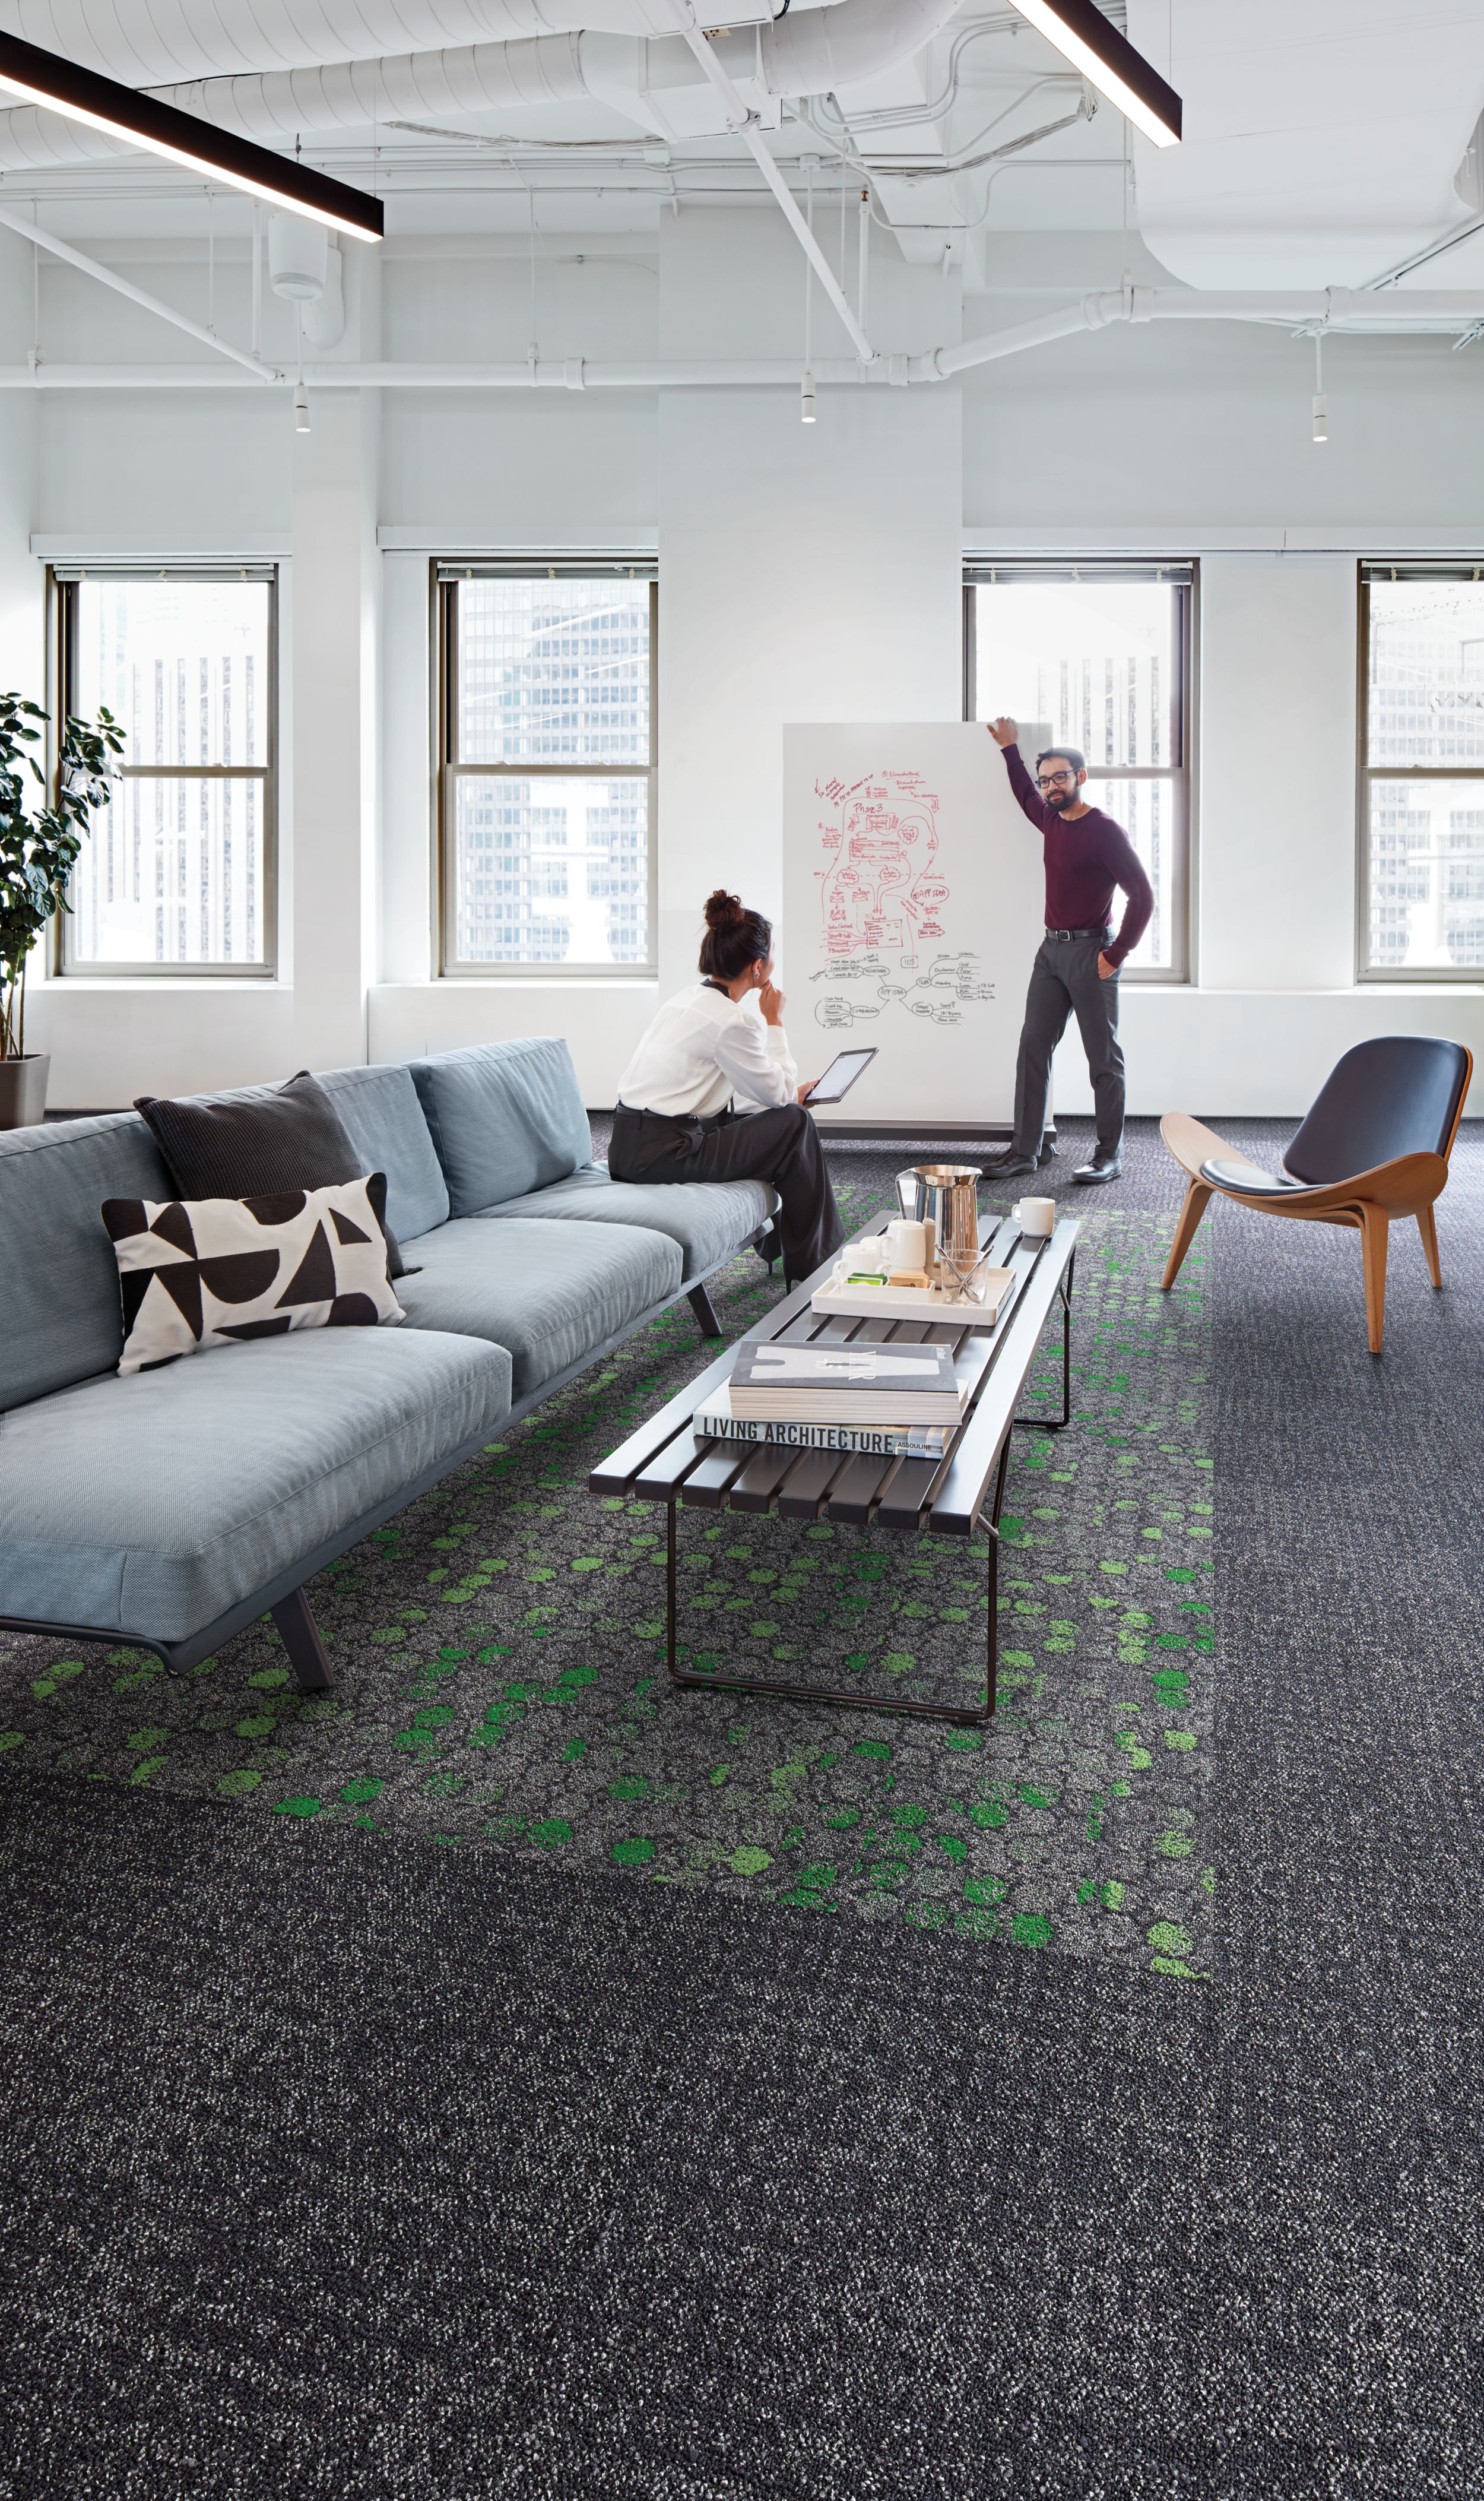 Interface Broome Street and Wheler Street in open office area with people numéro d’image 5